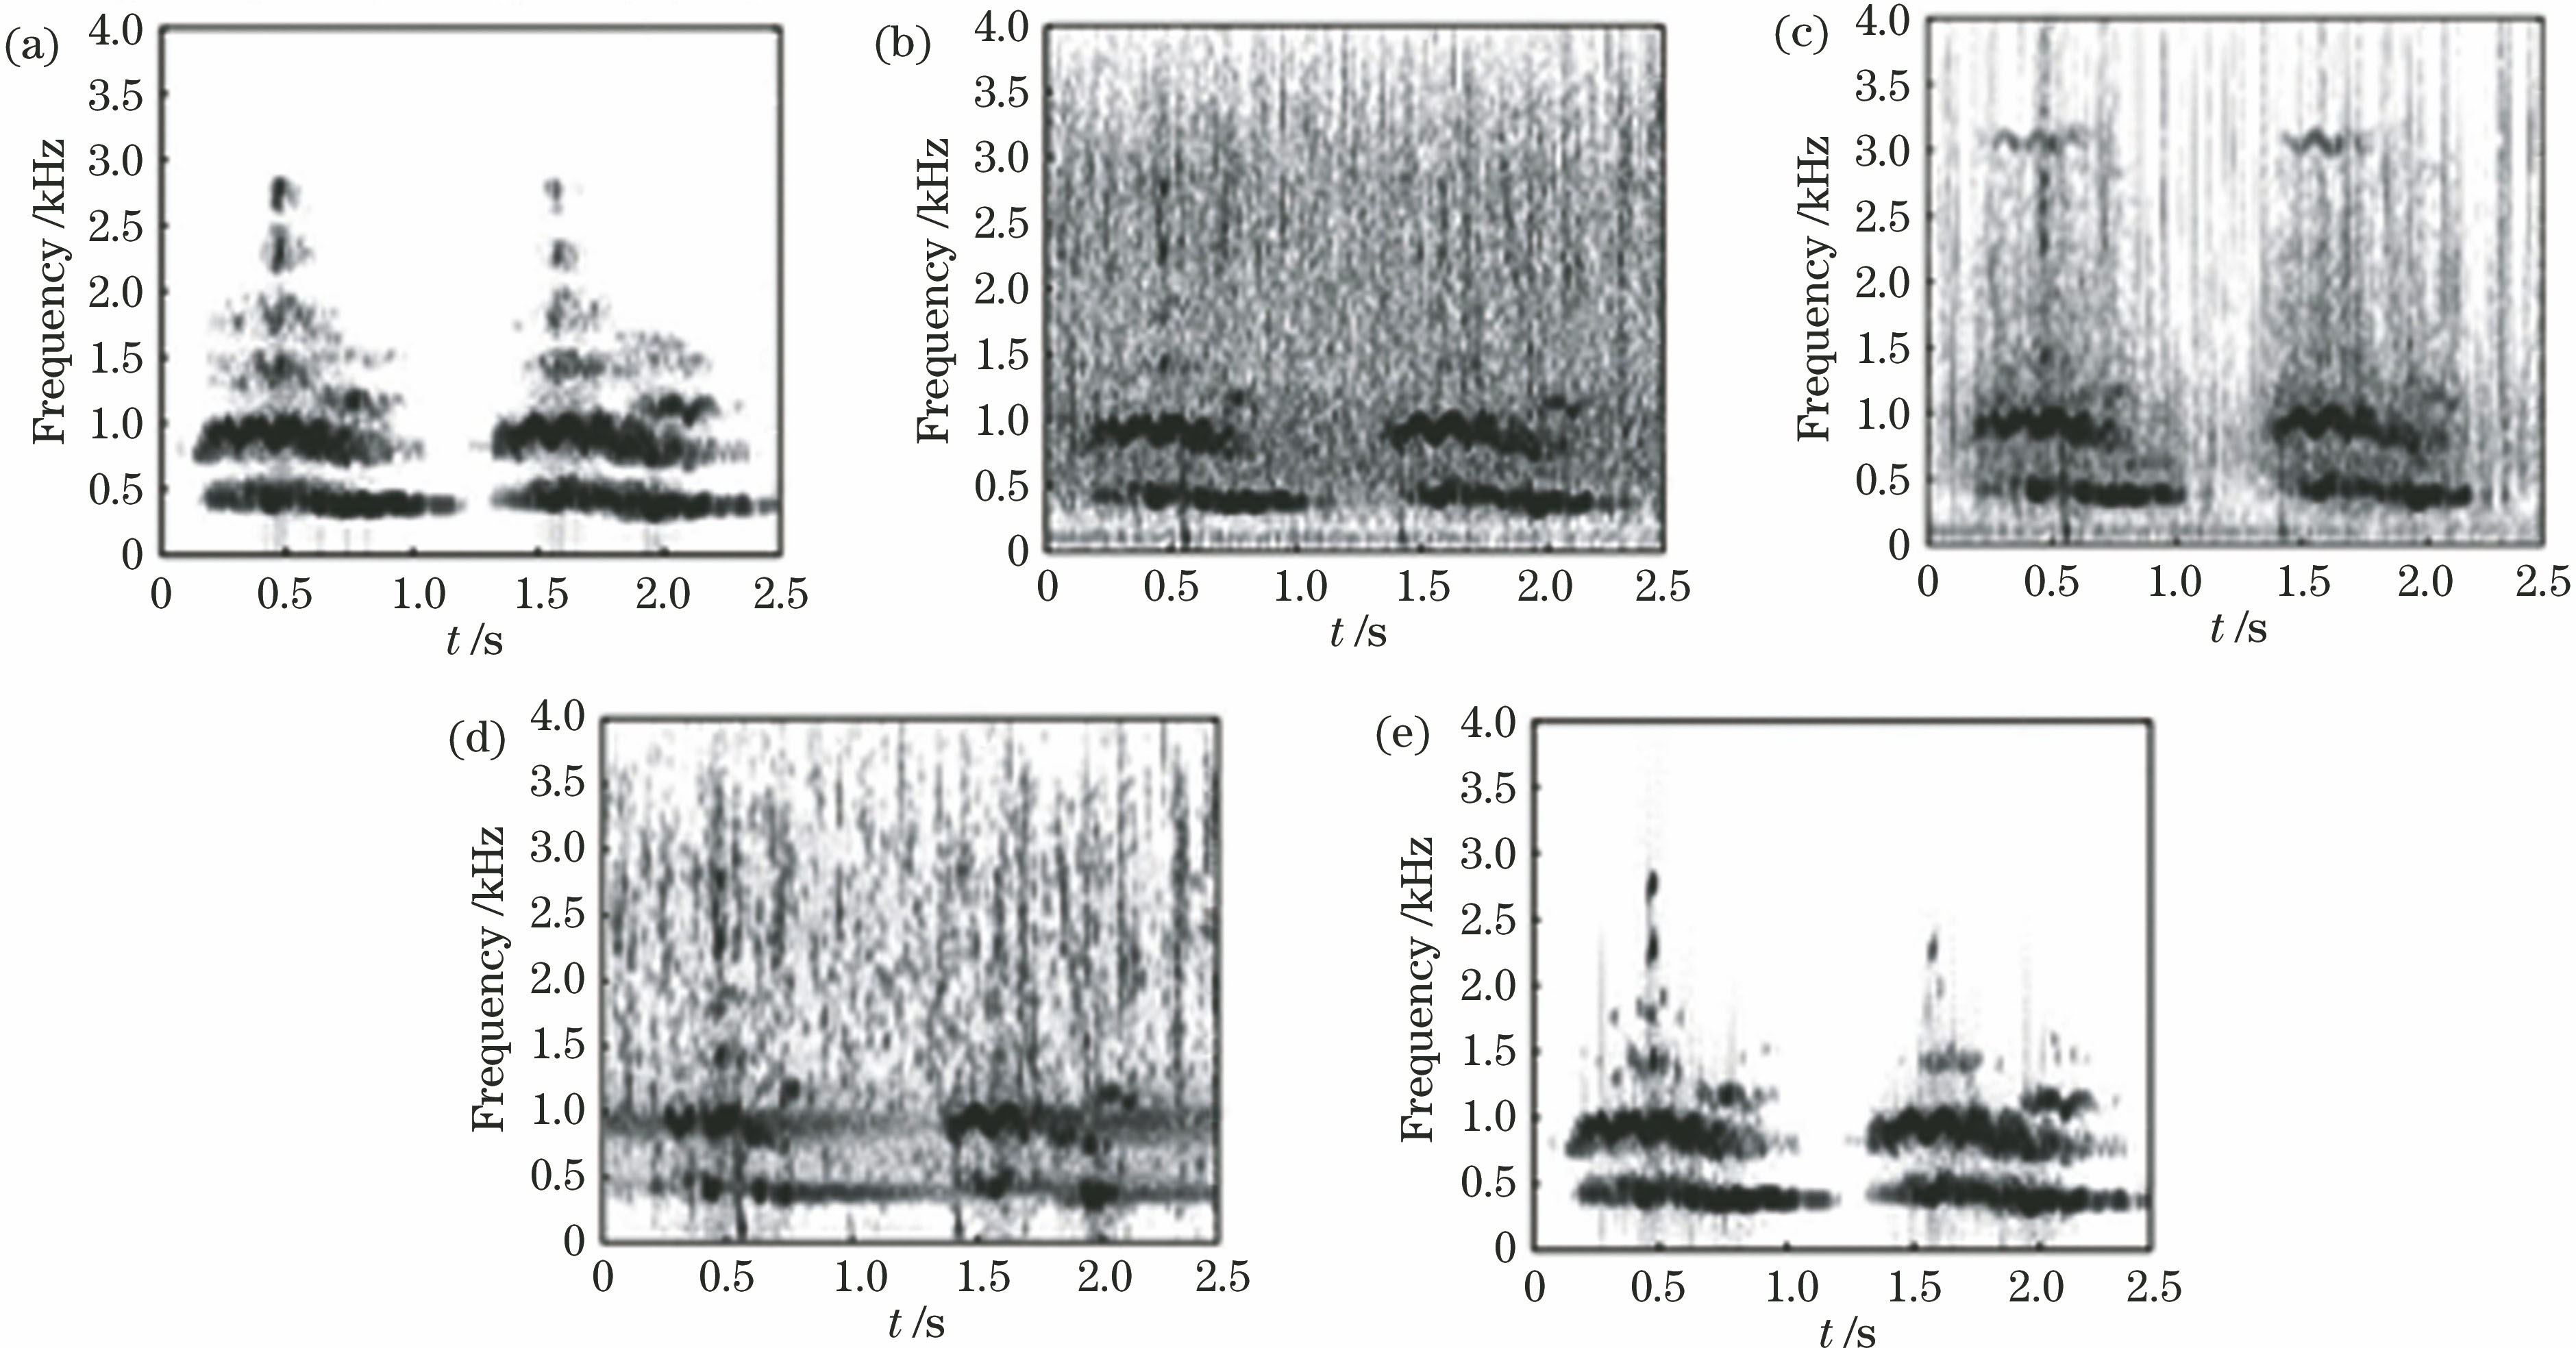 Animal calls and sound spectra of reconstructed signals by different algorithms. (a) Pure animal calls; (b) noise-added calls; (c) Pso-MP reconstructed signals; (d) OMP reconstructed signals; (e) APso-MP reconstructed signals